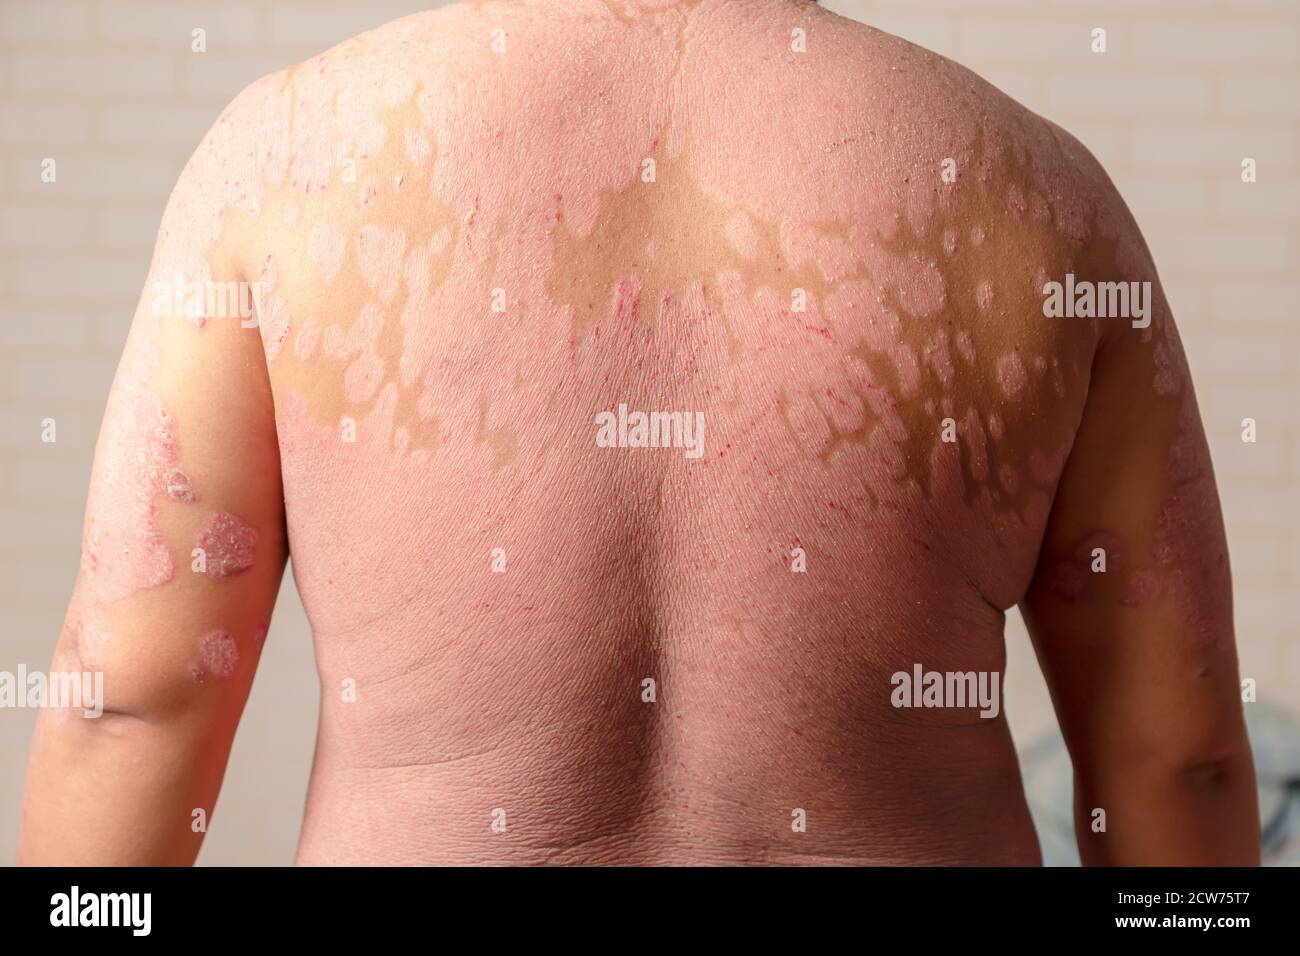 Diseases caused by abnormalities of the lymph. Psoriasis is a skin disease. Stock Photo